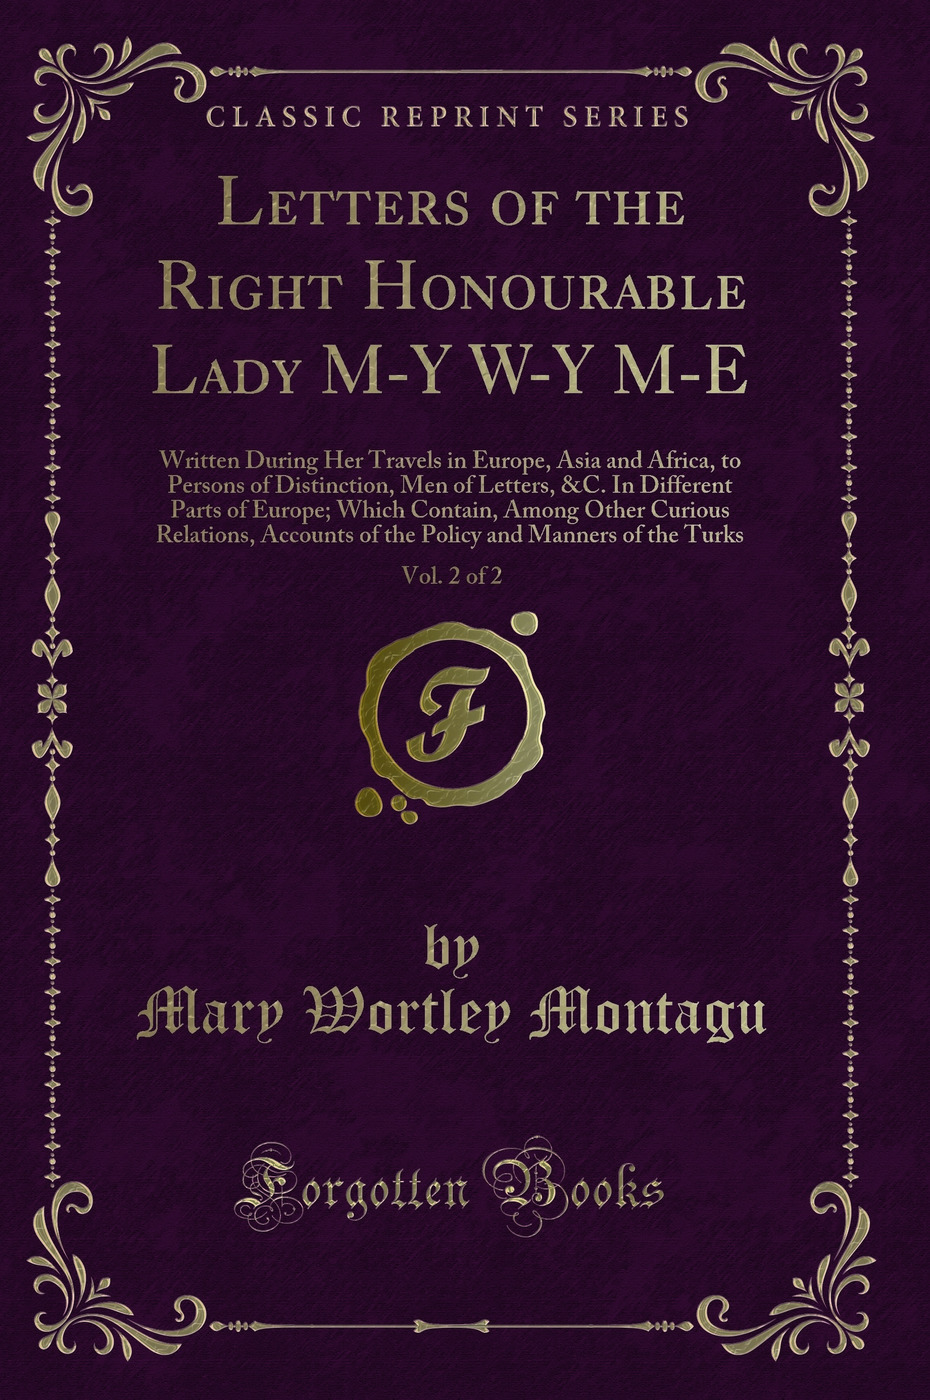 Letters of the Right Honourable Lady M-Y W-Y M-E, Vol. 2 of 2 (Classic Reprint) - Mary Wortley Montagu